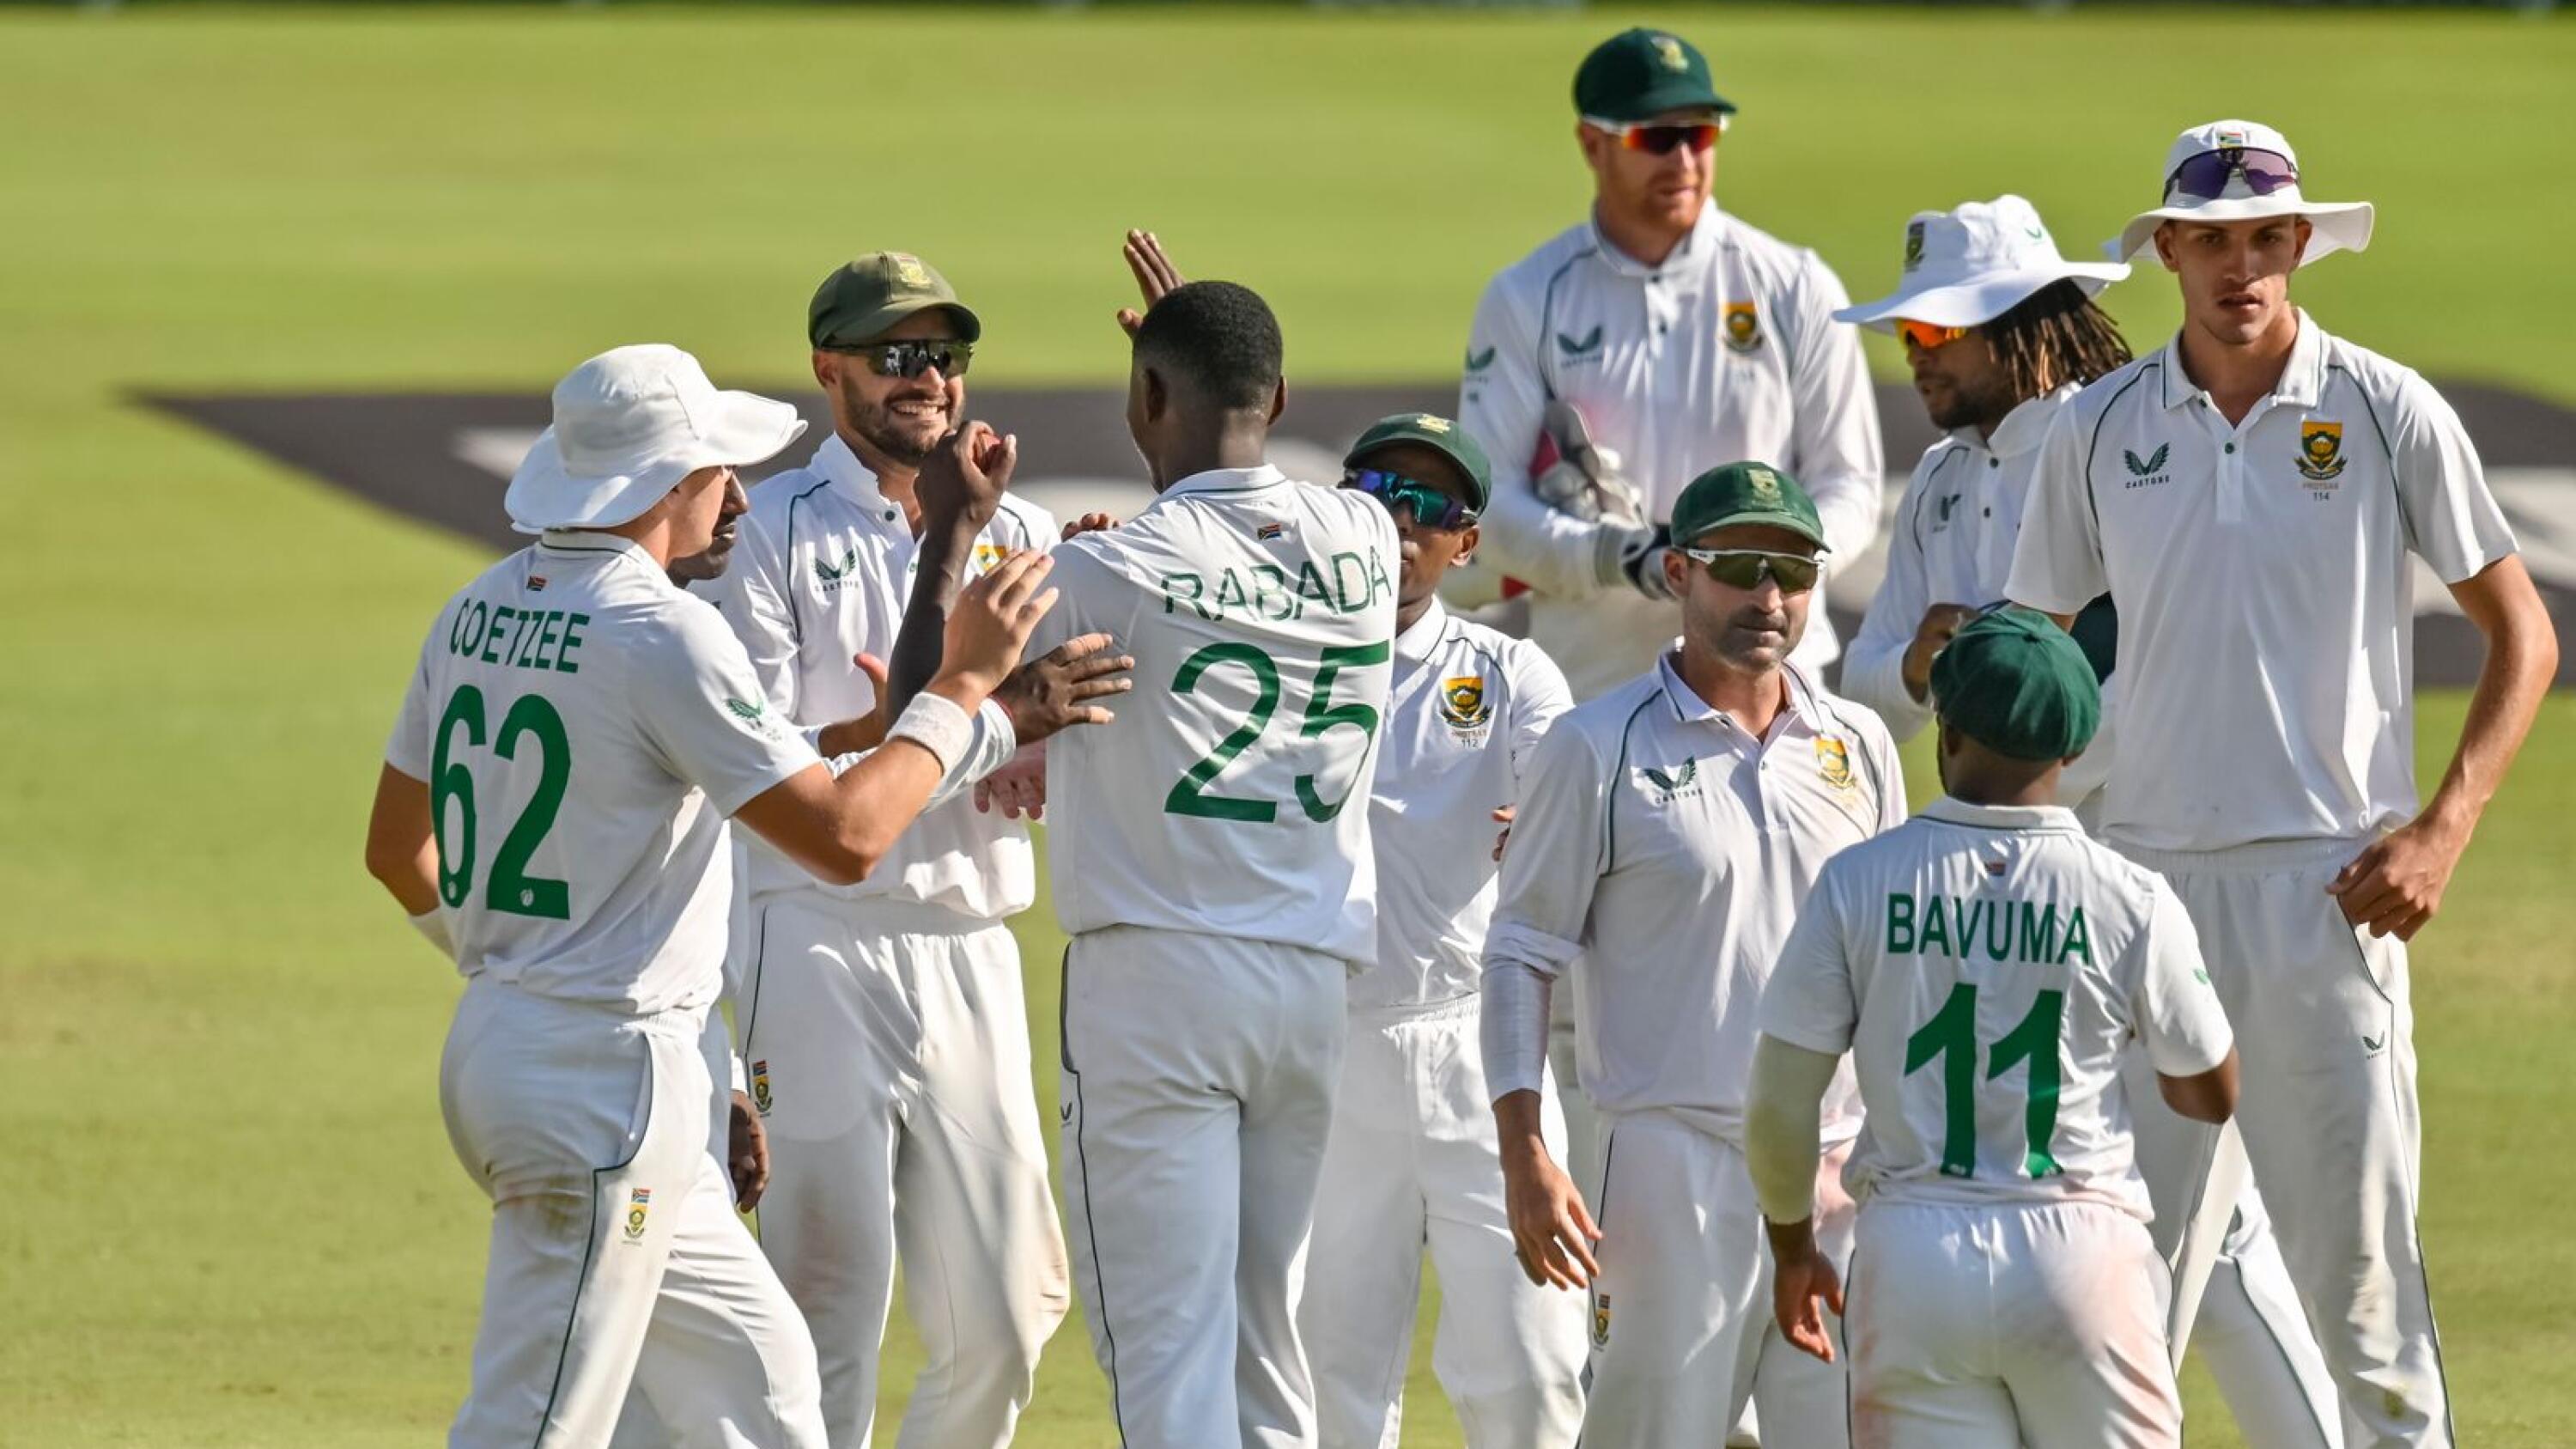 South Africa’s Kagiso Rabada is congratulated by teammates after picking up his sixth wicket during day three of the first Test against the West Indies at SuperSport Park in Centurion on Thursday